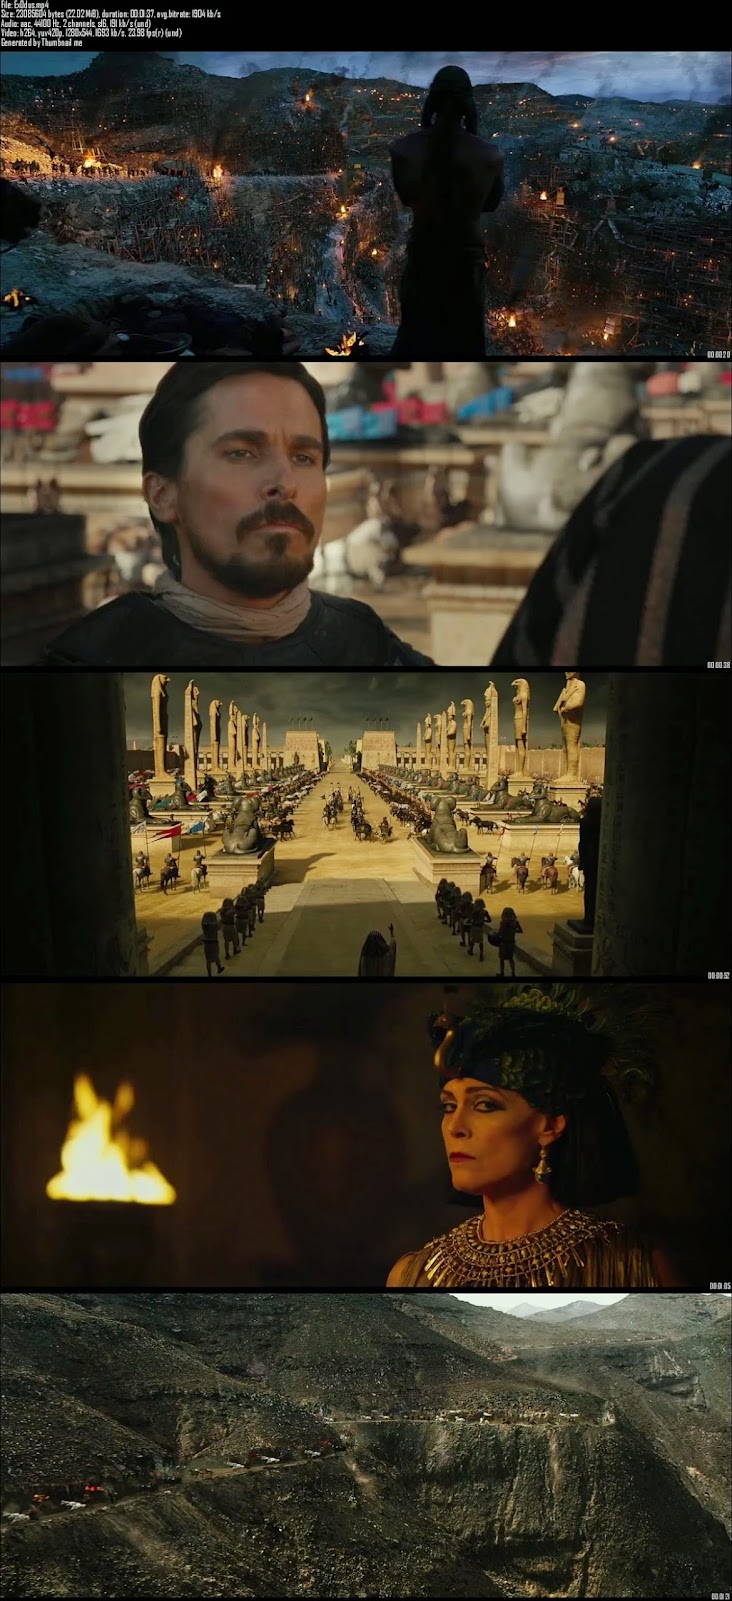 Mediafire Resumable Download Link For Teaser Promo Of Exodus Gods and Kings (2014)